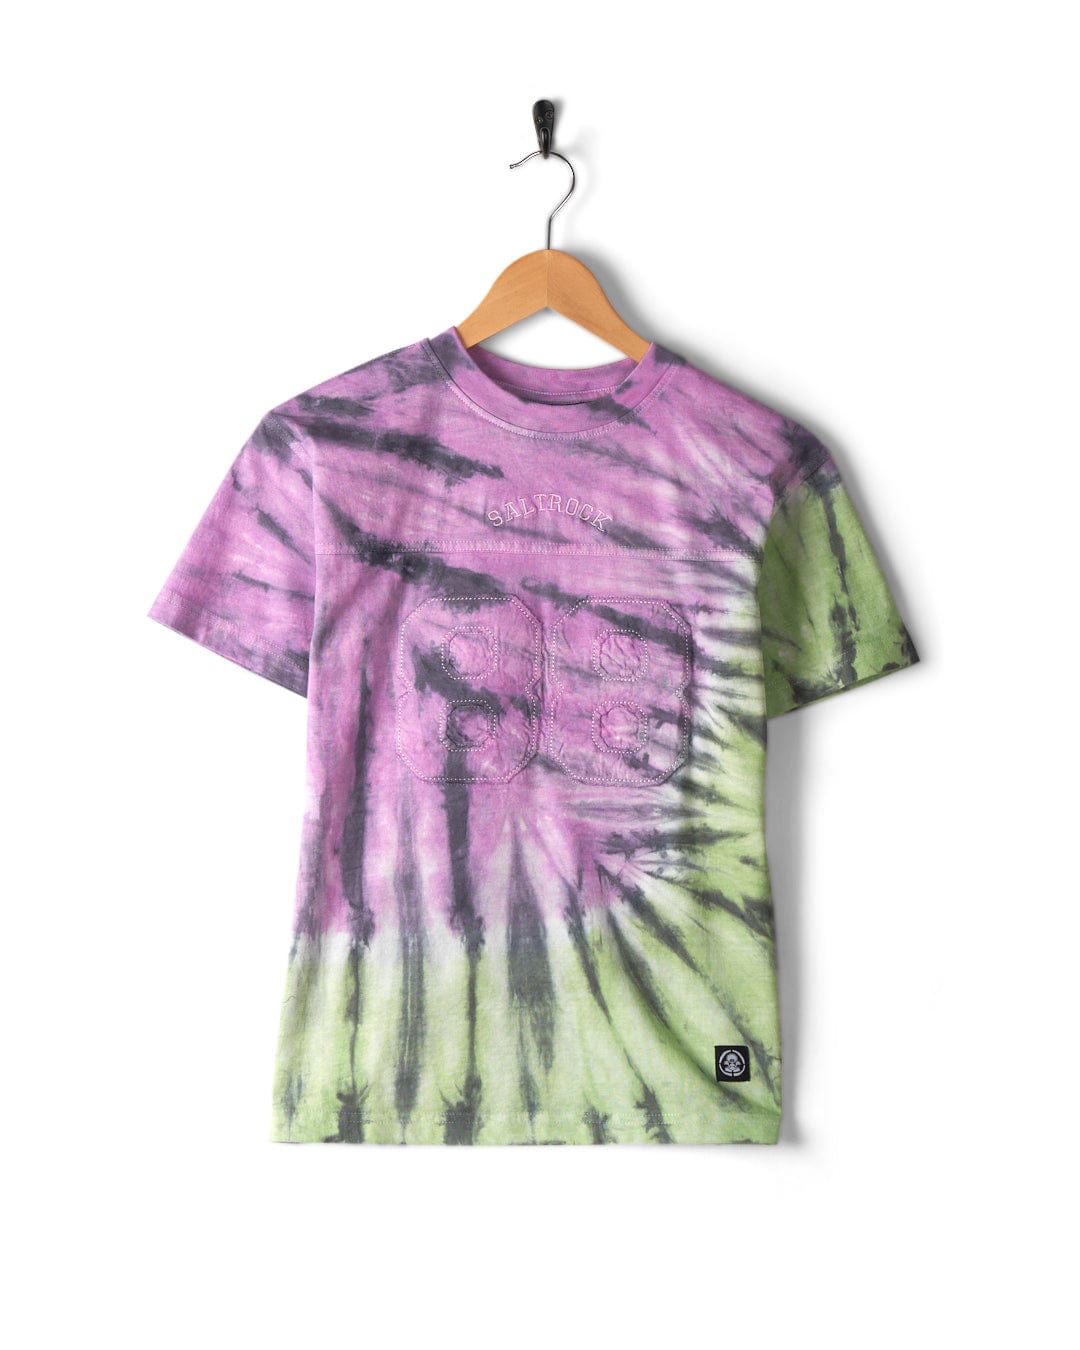 Rock Valley - Kids T-Shirt - Multi in green and purple, hanging on a wooden hanger with a black hook. Crafted from 100% cotton, the shirt features a small patch on the lower right side and subtle Saltrock branding.